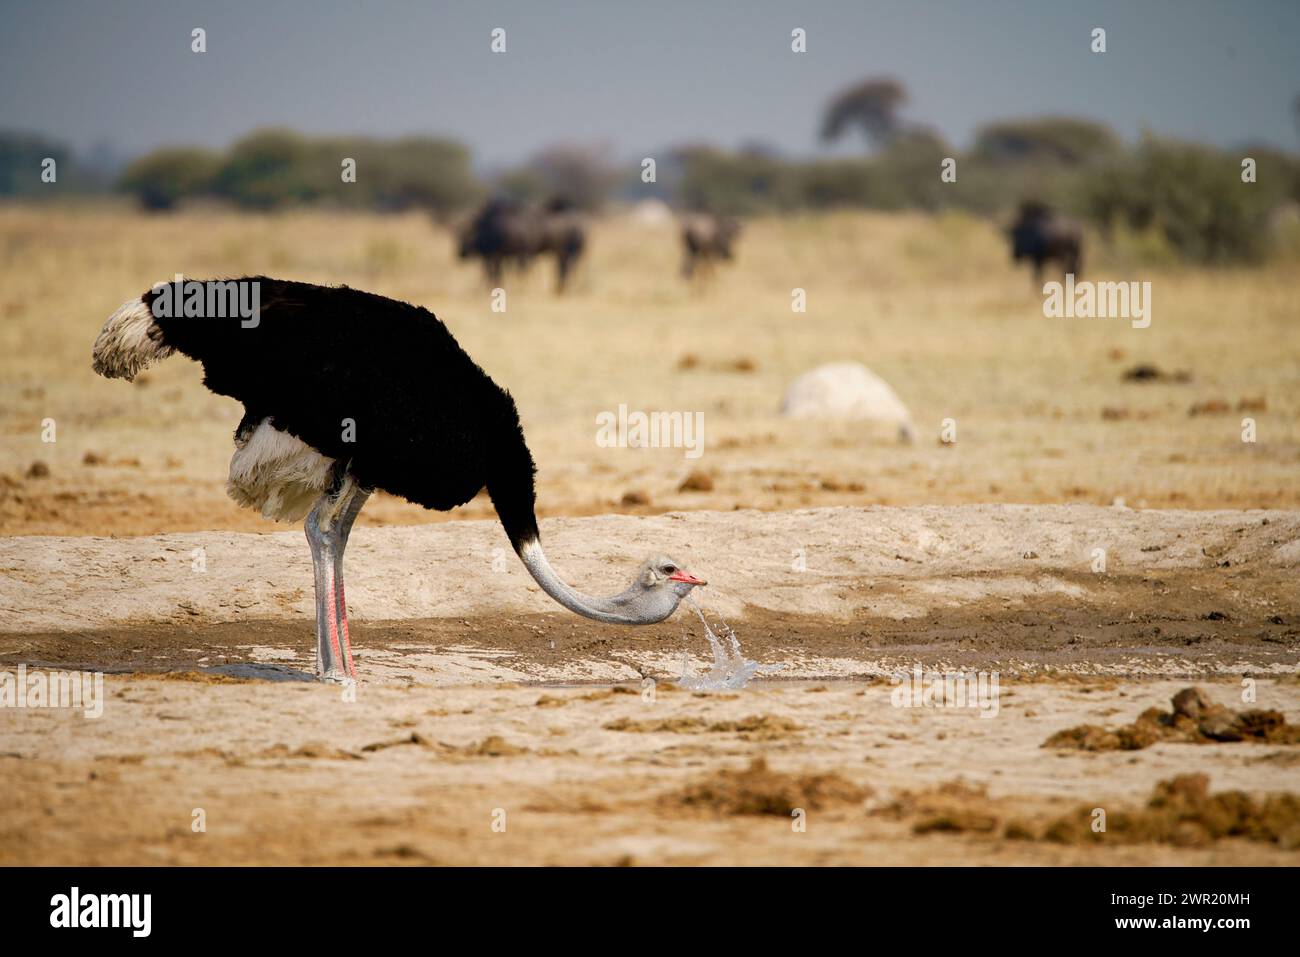 A male ostrich drinking at a waterhole on open savannah in Africa. Stock Photo